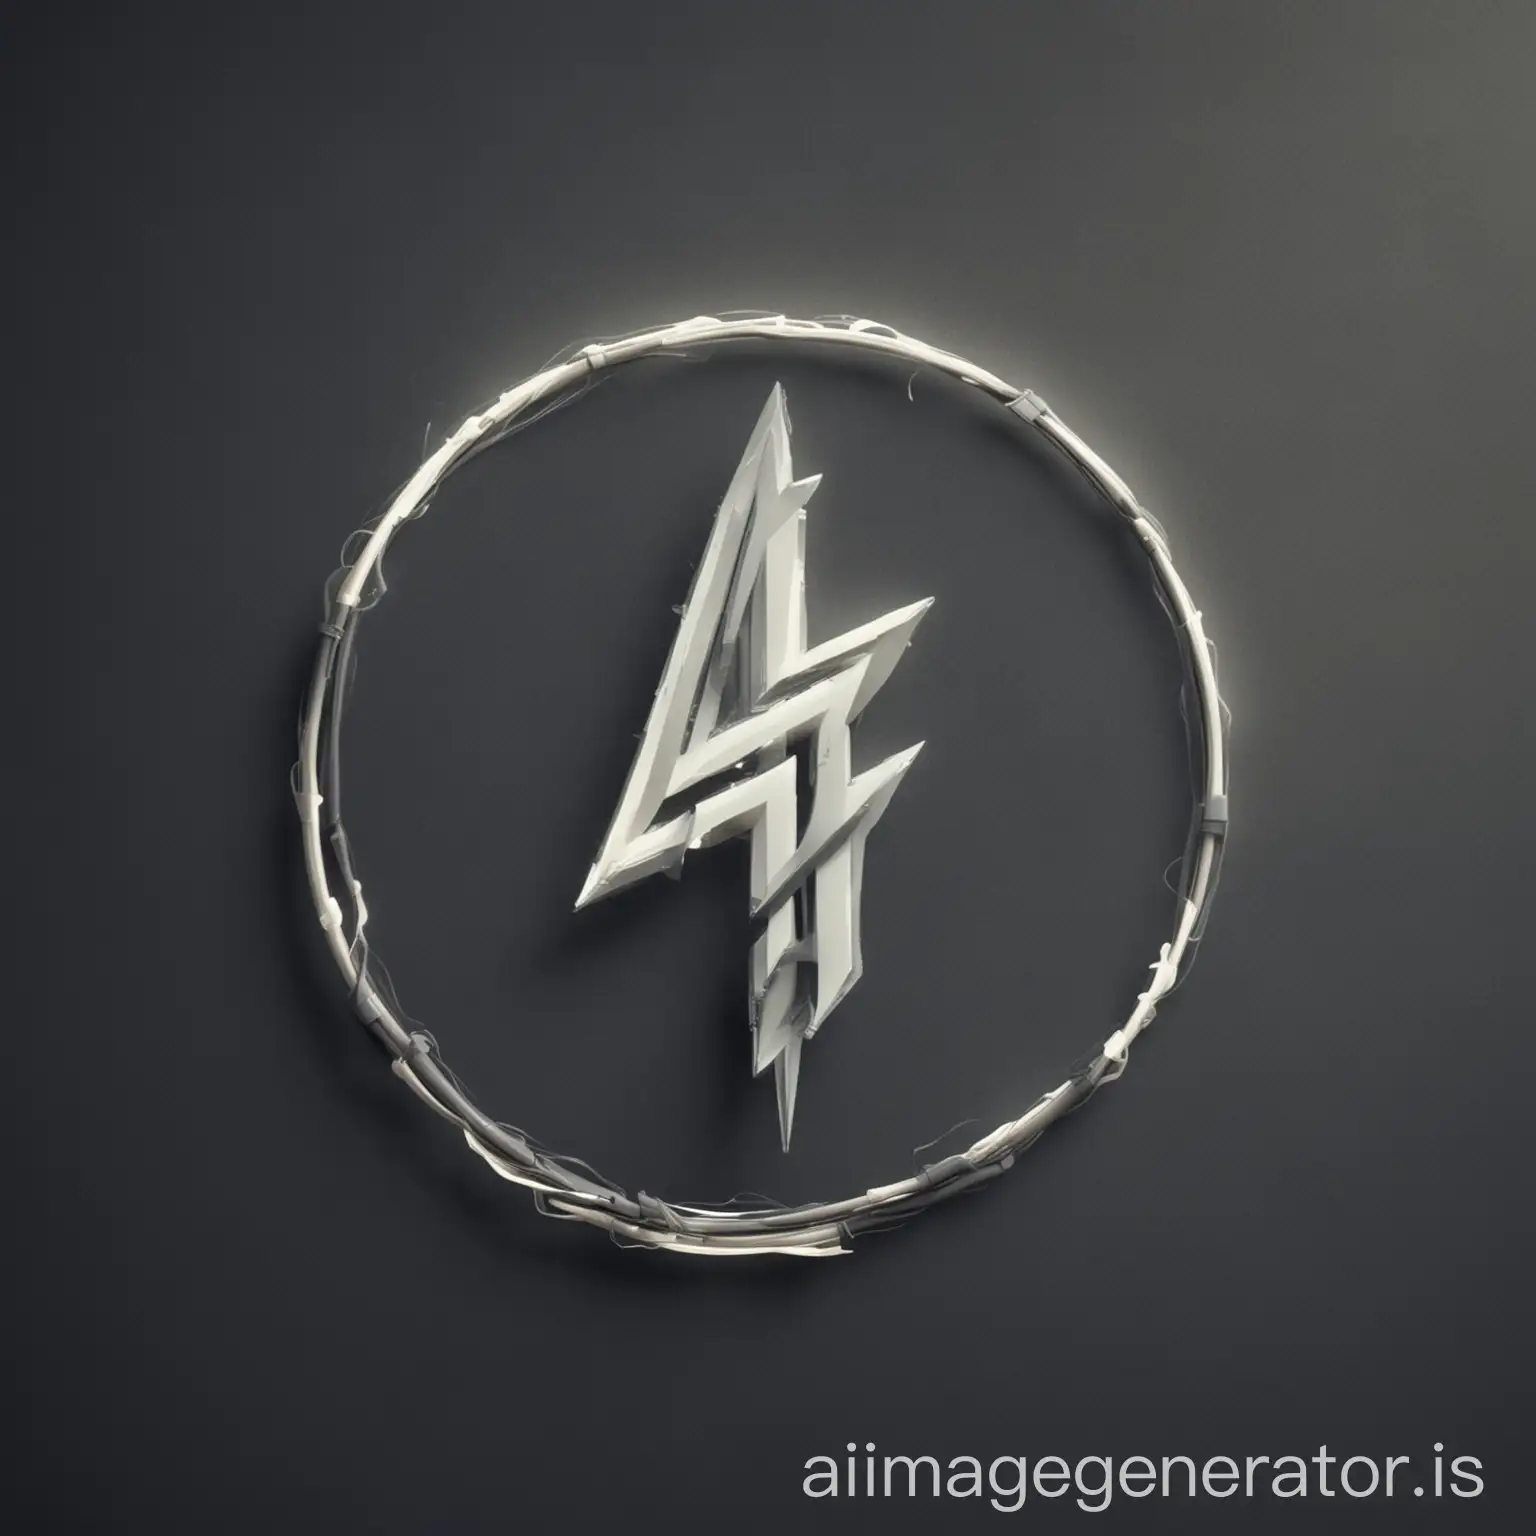 logo of an electric company